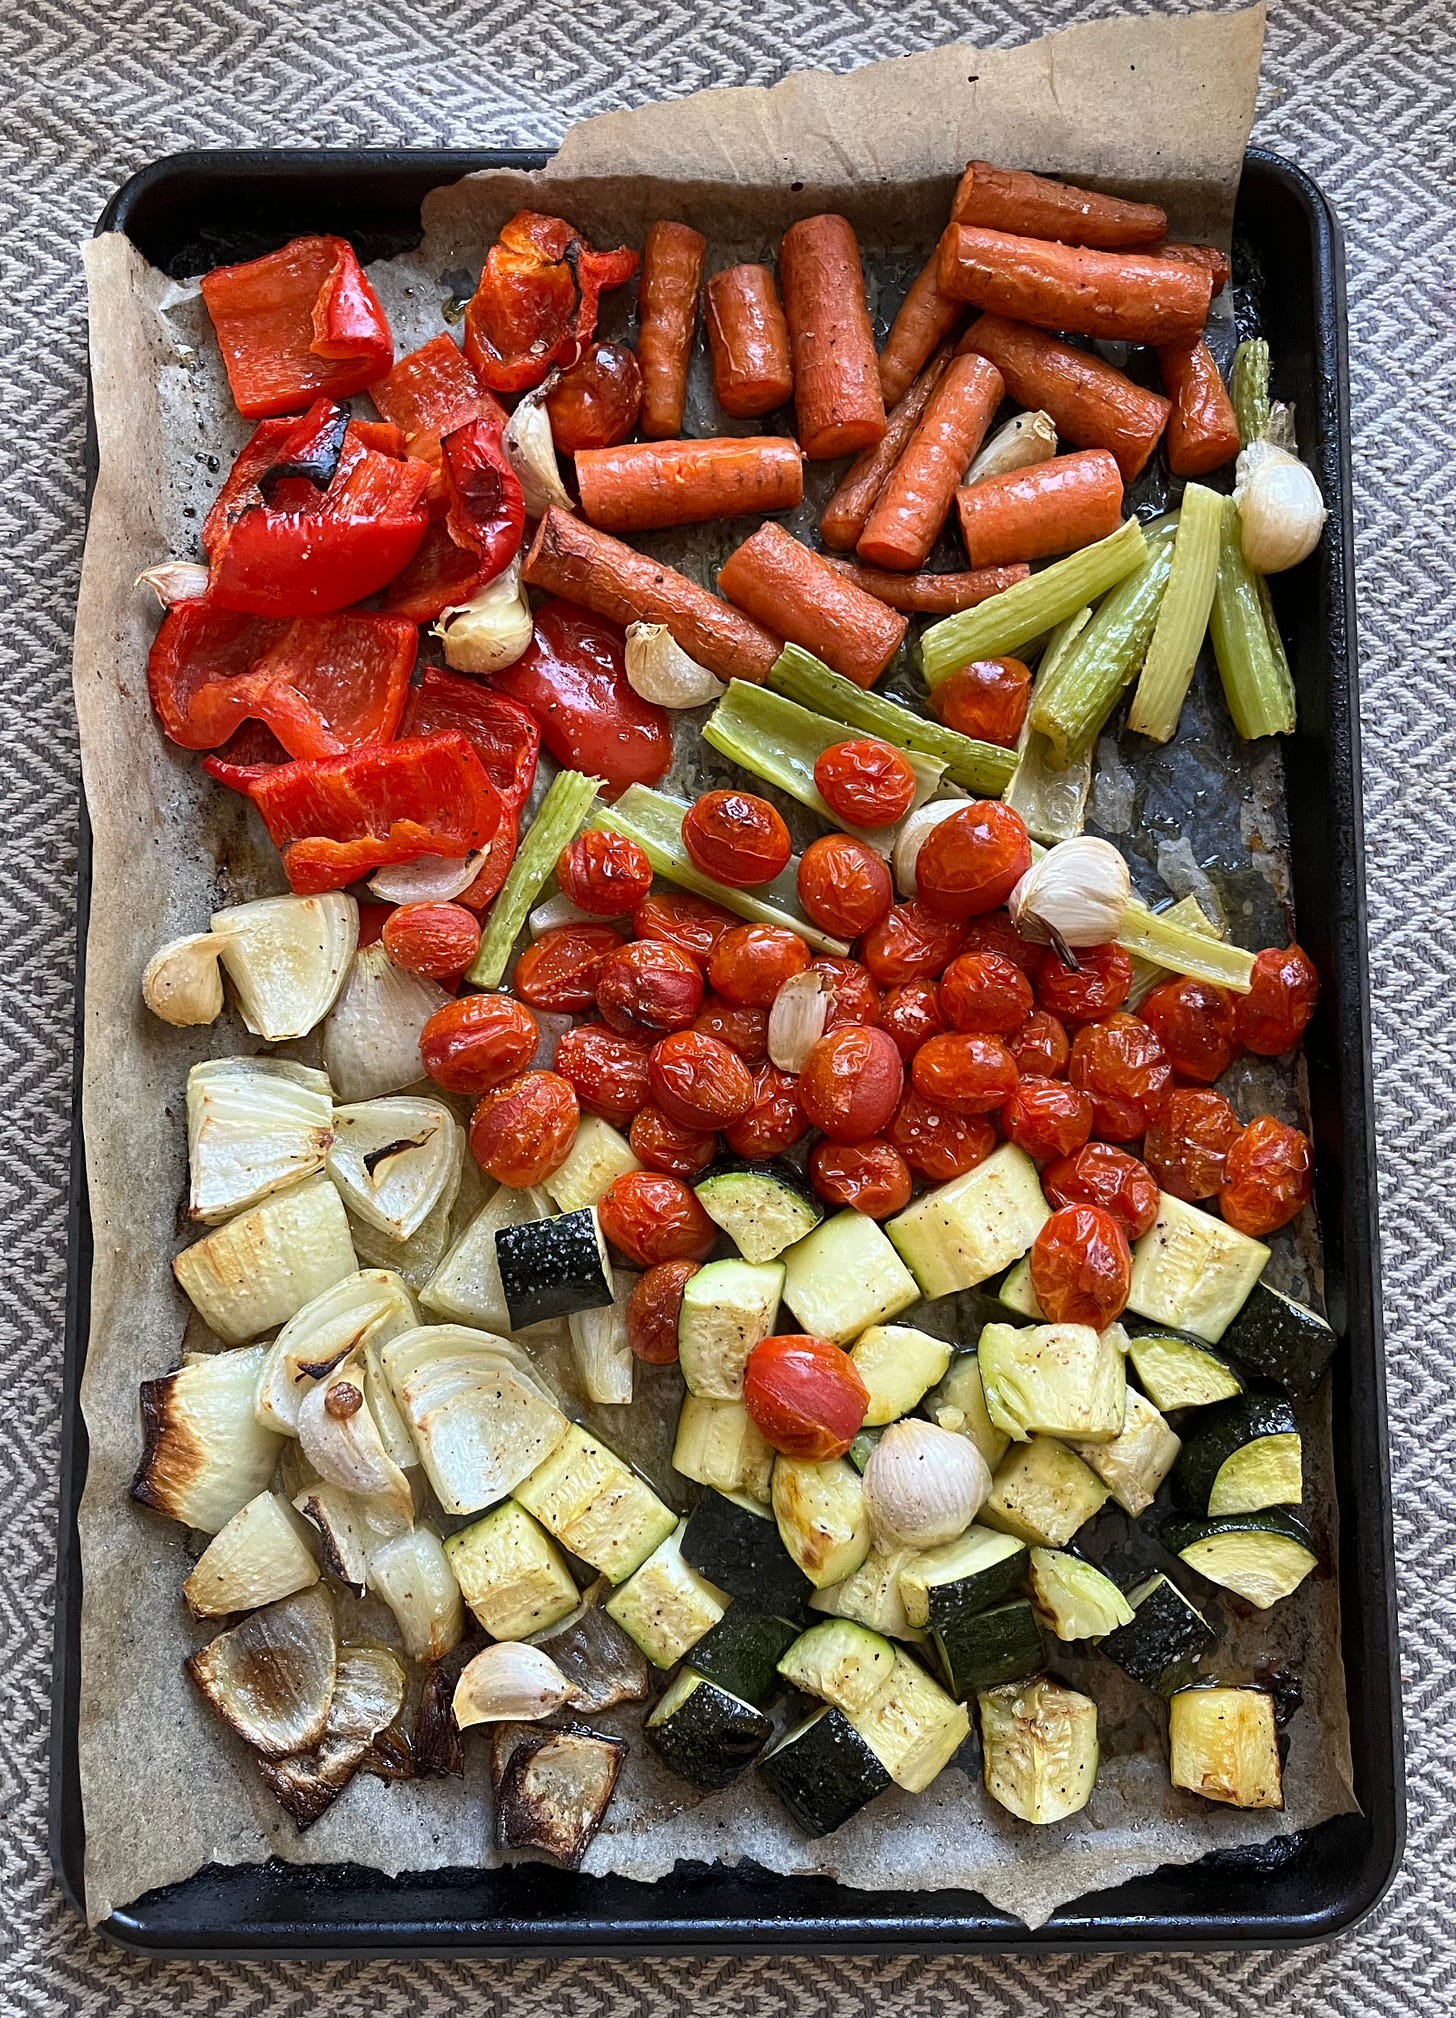 Tray of roasted vegetables.